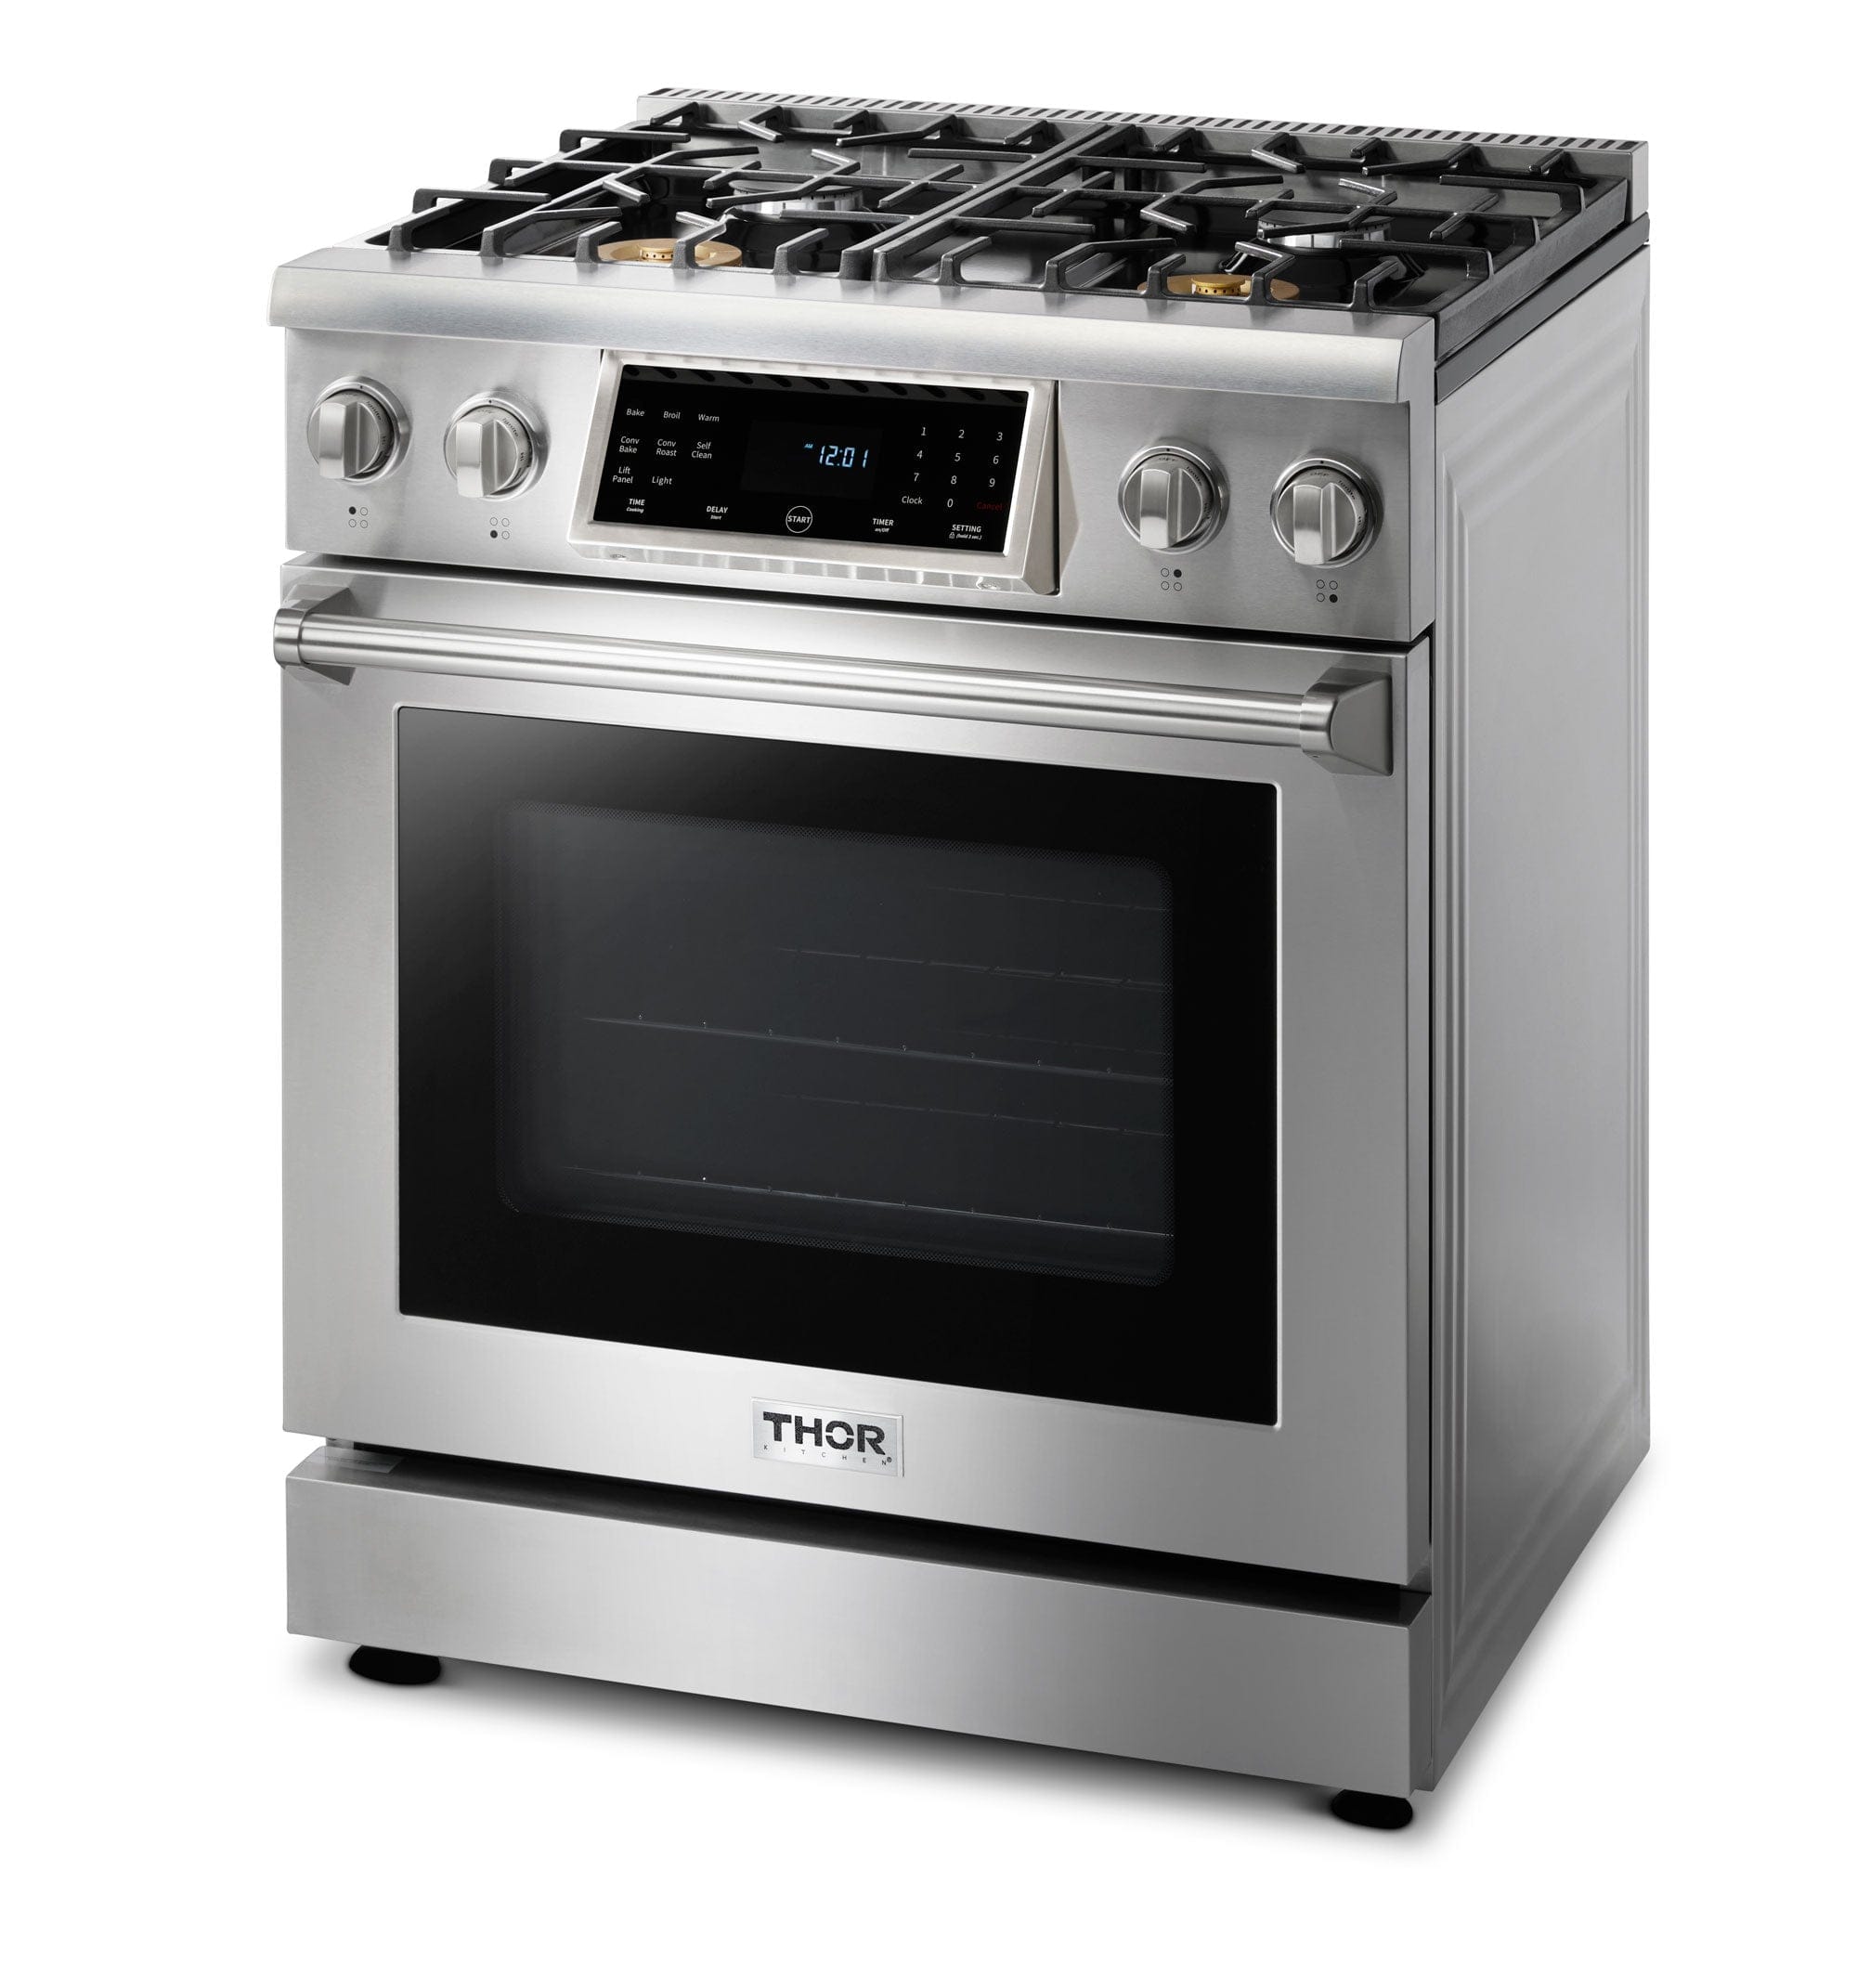 Thor Kitchen 30 In. 4.6 cu. ft. Self-Clean Gas Range in Stainless Steel with Front Touch Control TRG3001 Ranges TRG3001 Luxury Appliances Direct